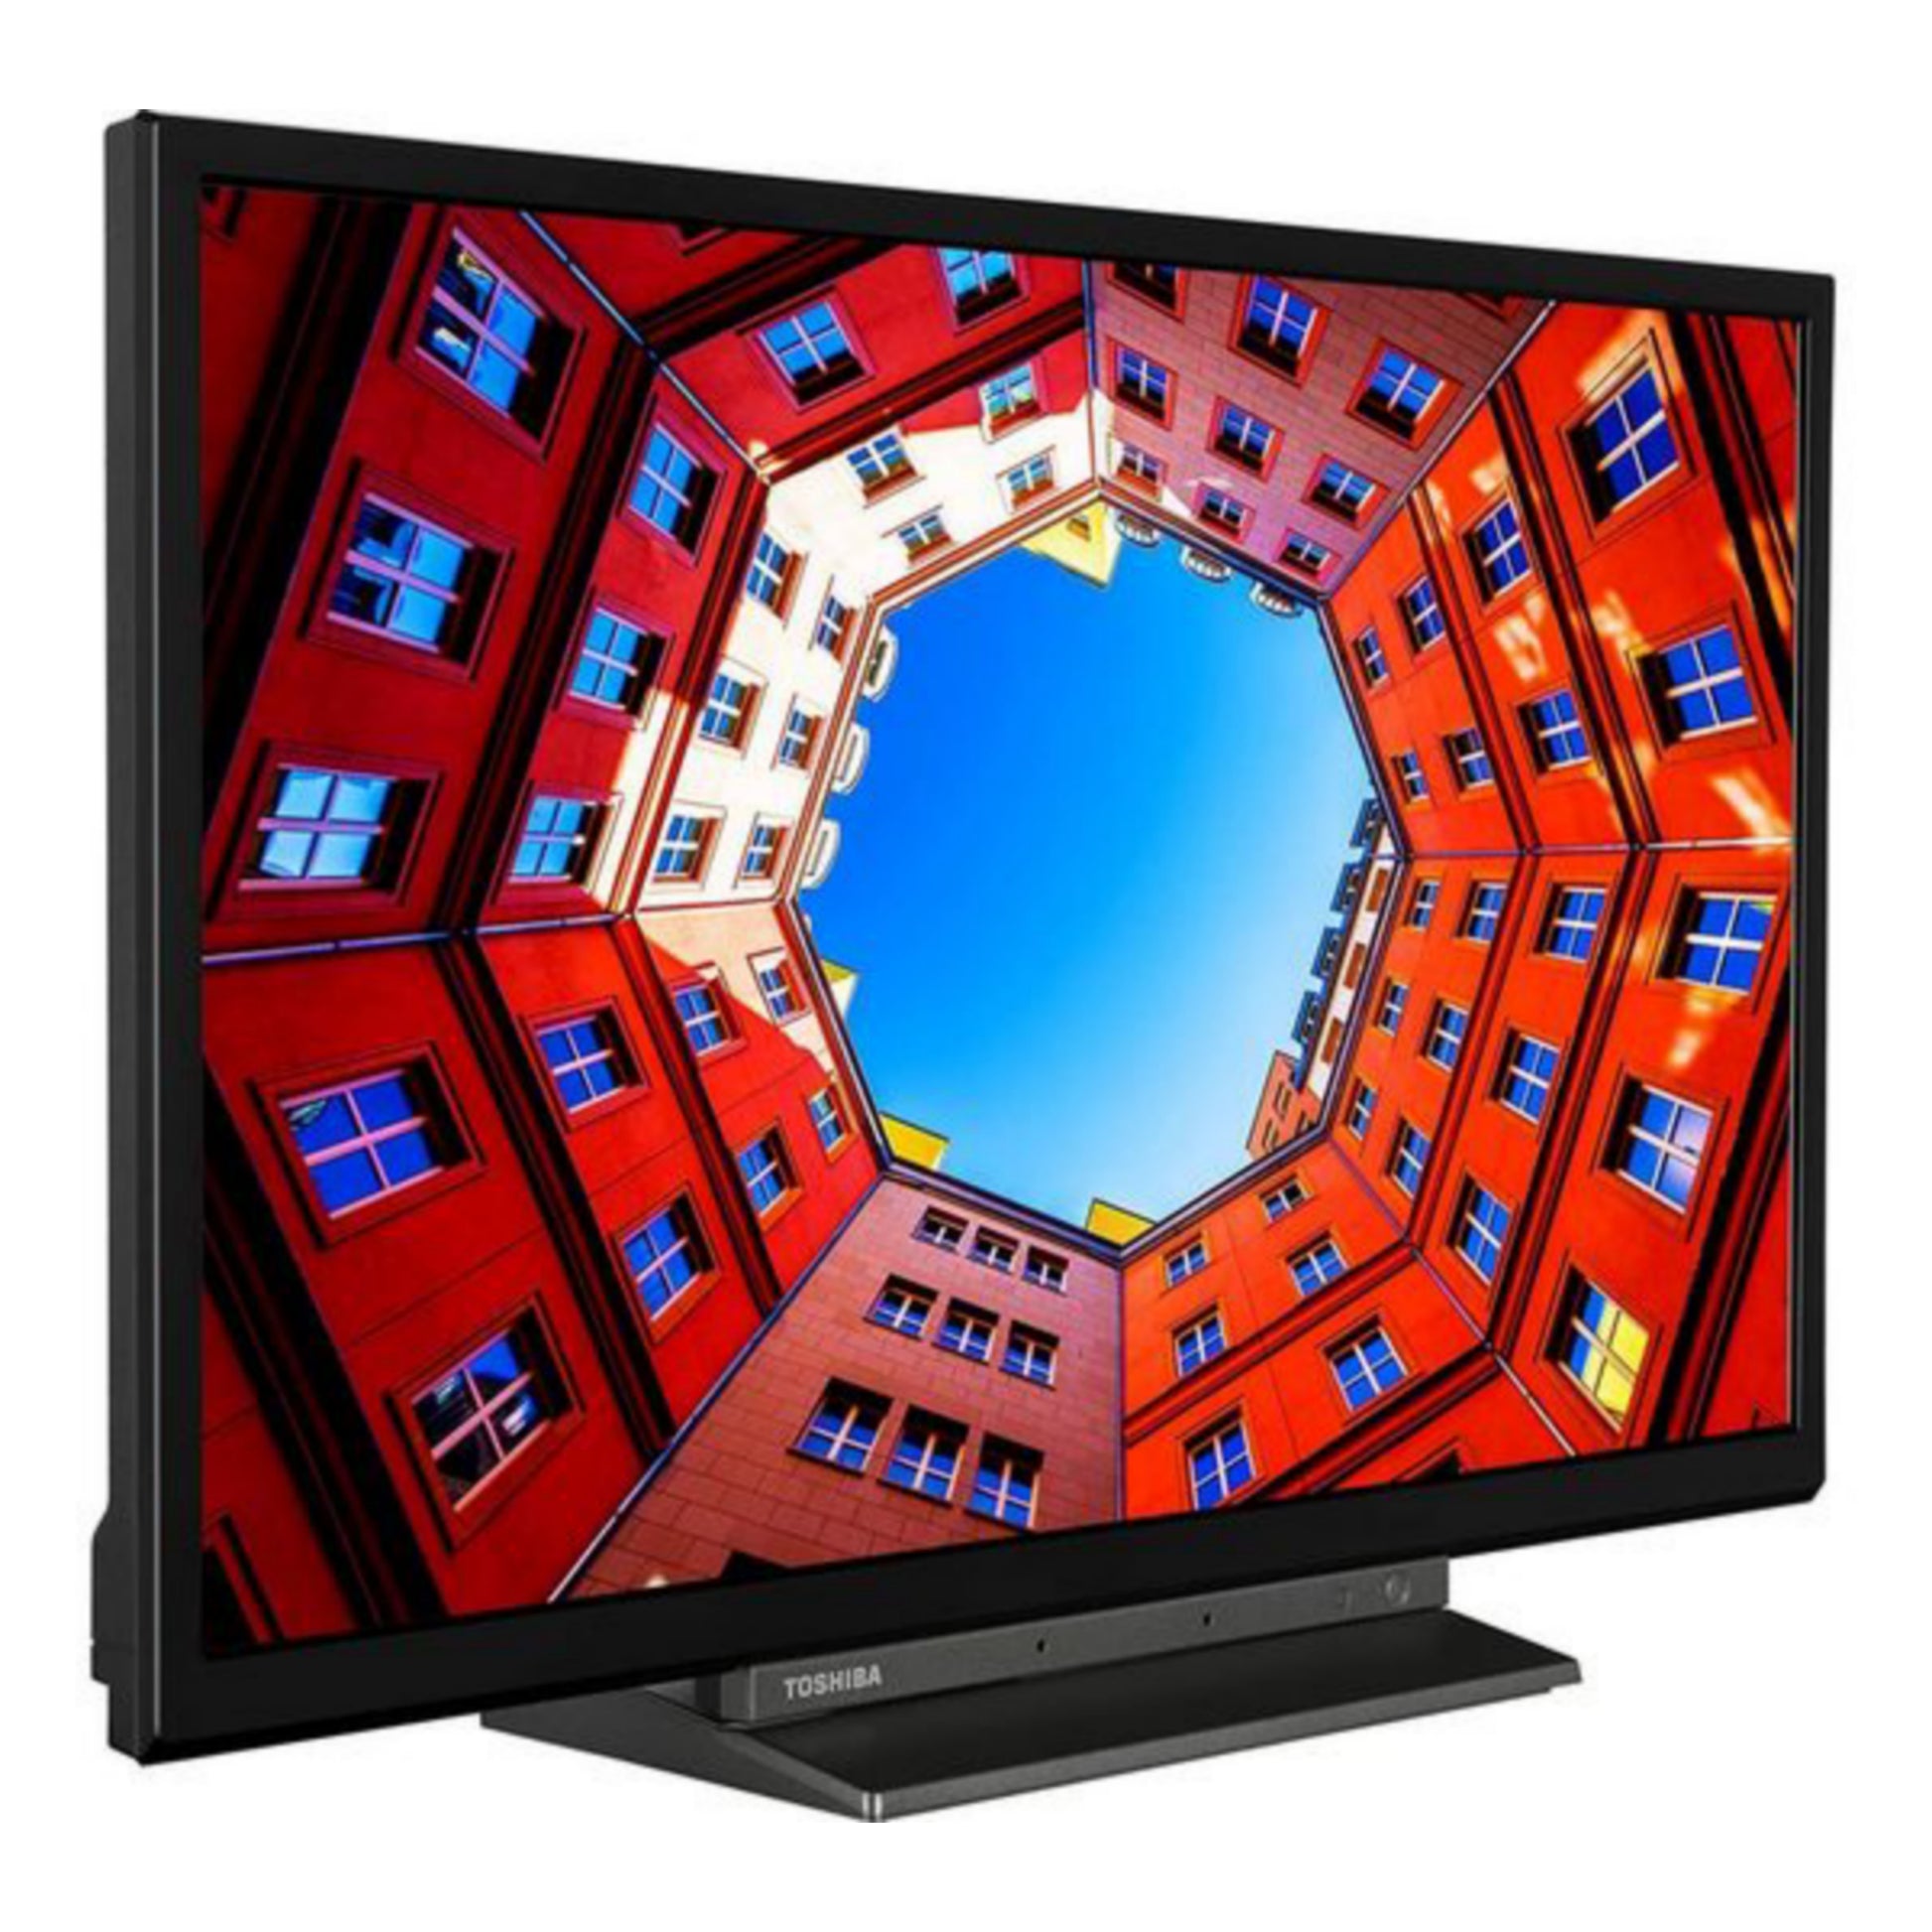 Toshiba L2 and L3 series, Full HD LED TVs with extensive picture-picture  and connectivity features